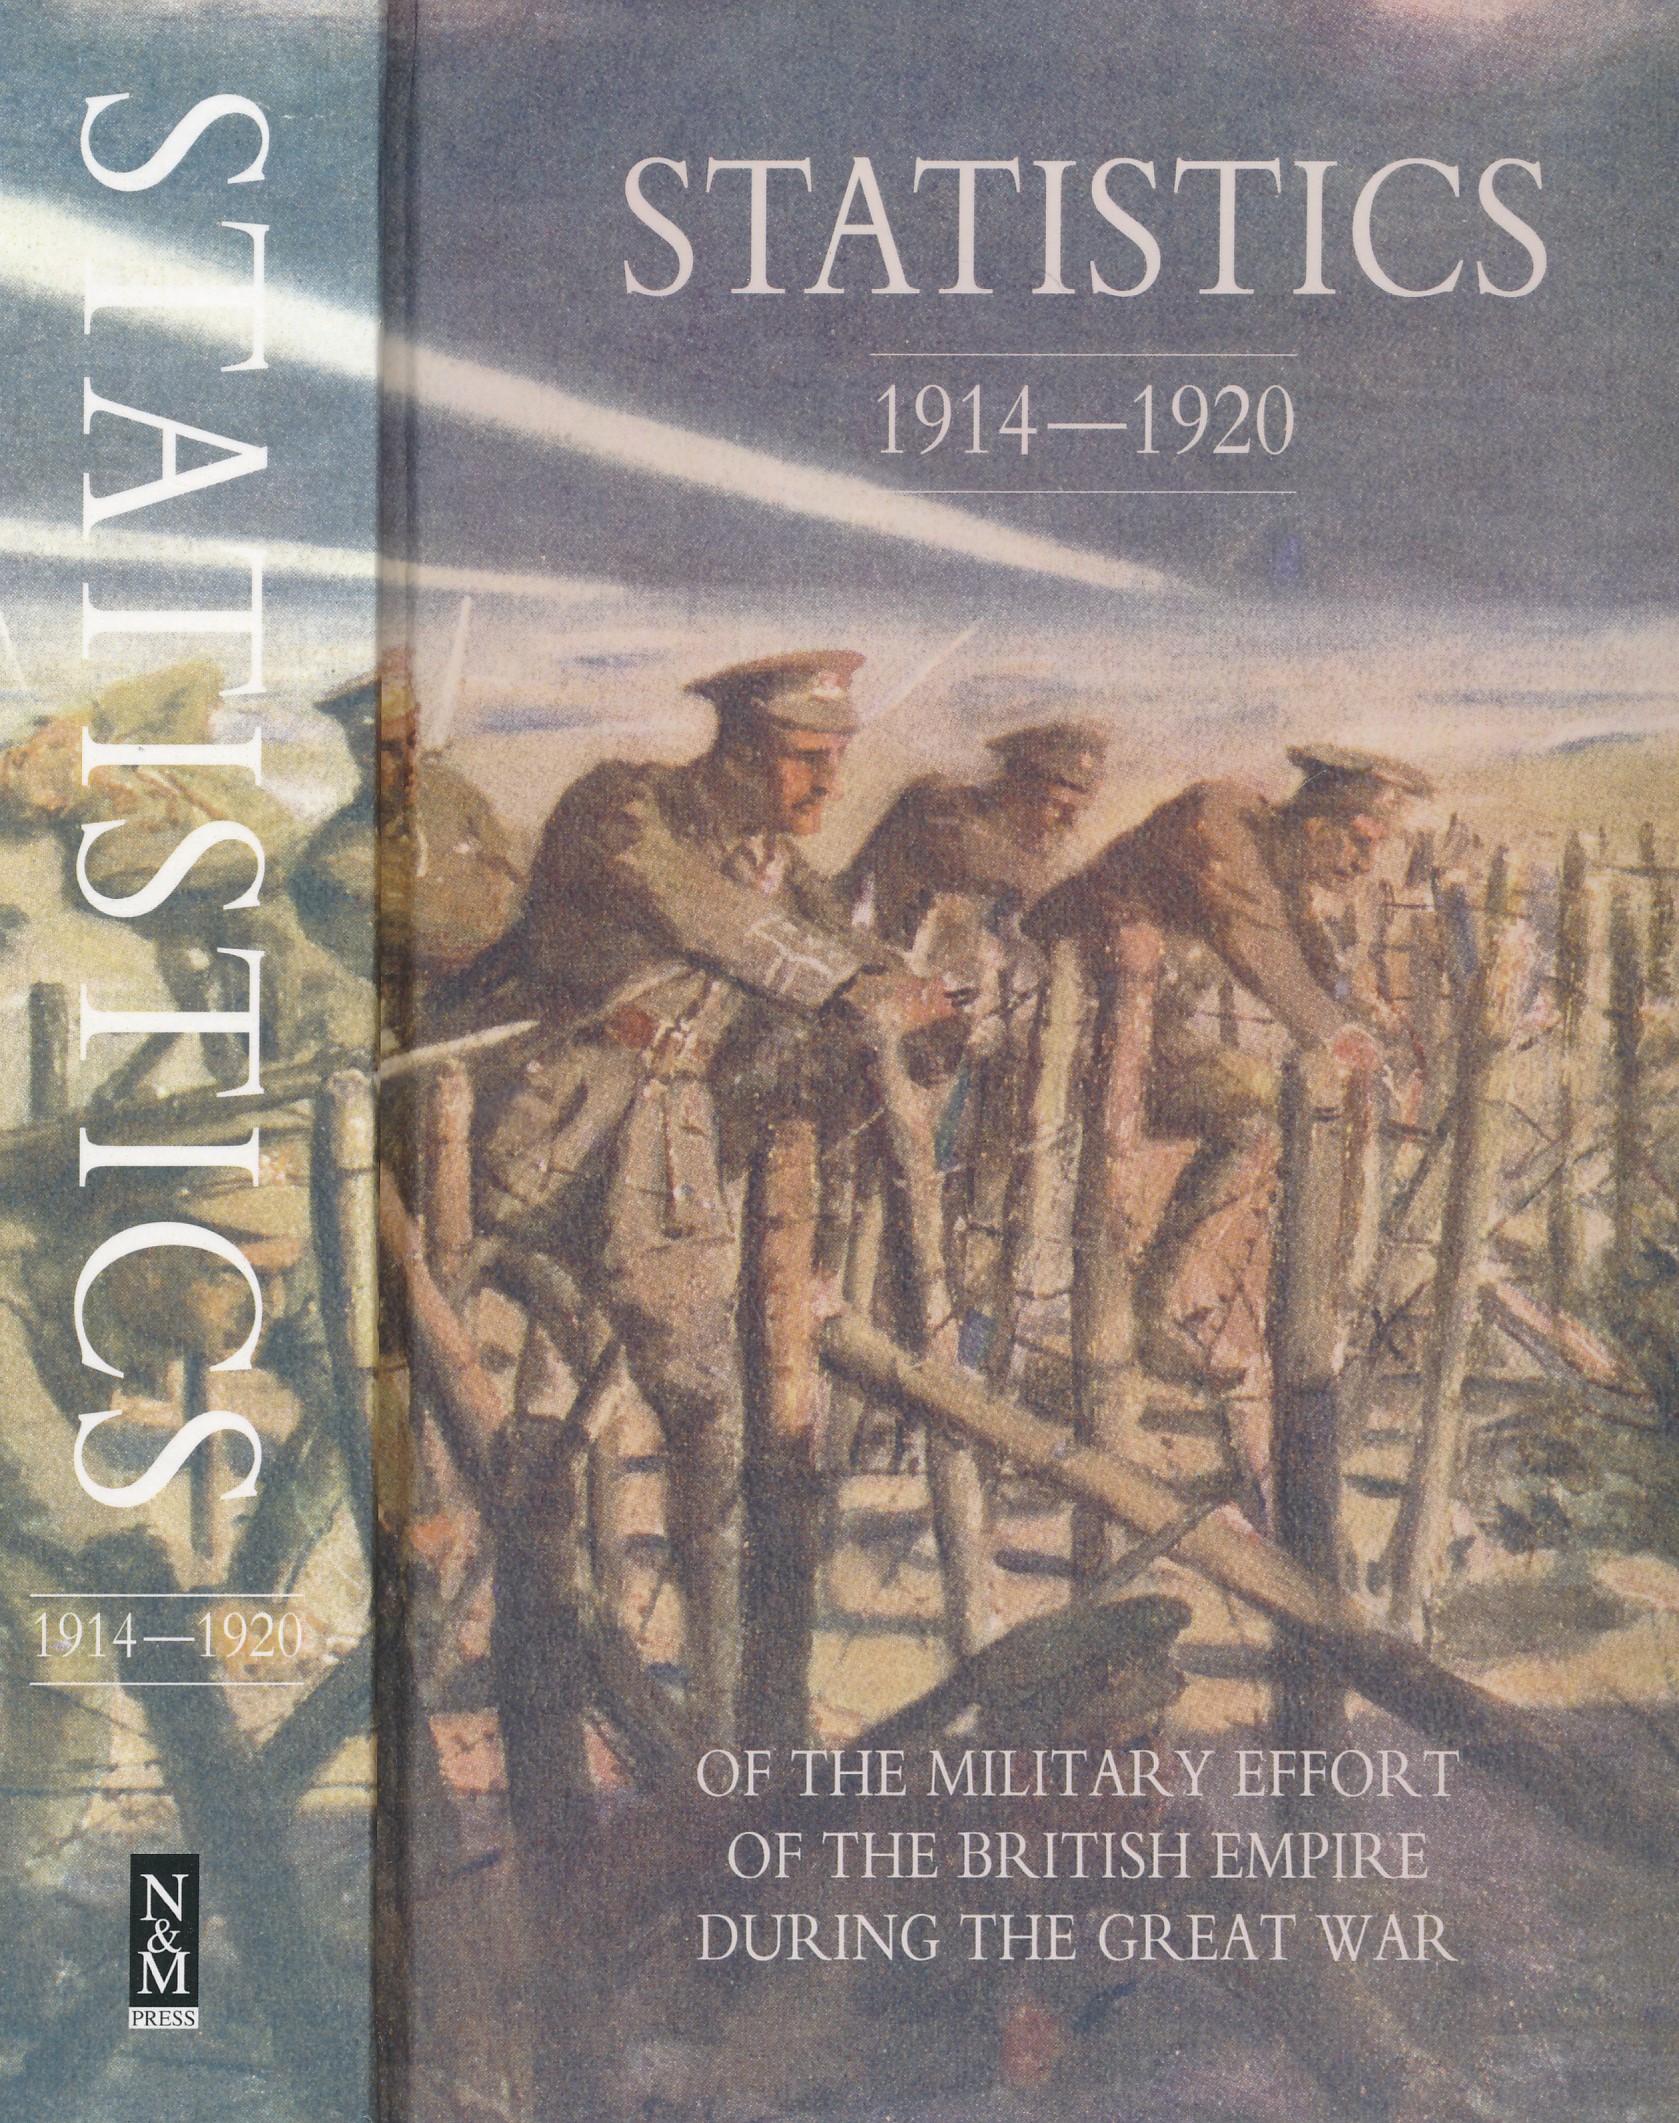 Statistics 1914-1920. Of the Military Effort of the British Empire During the Great War